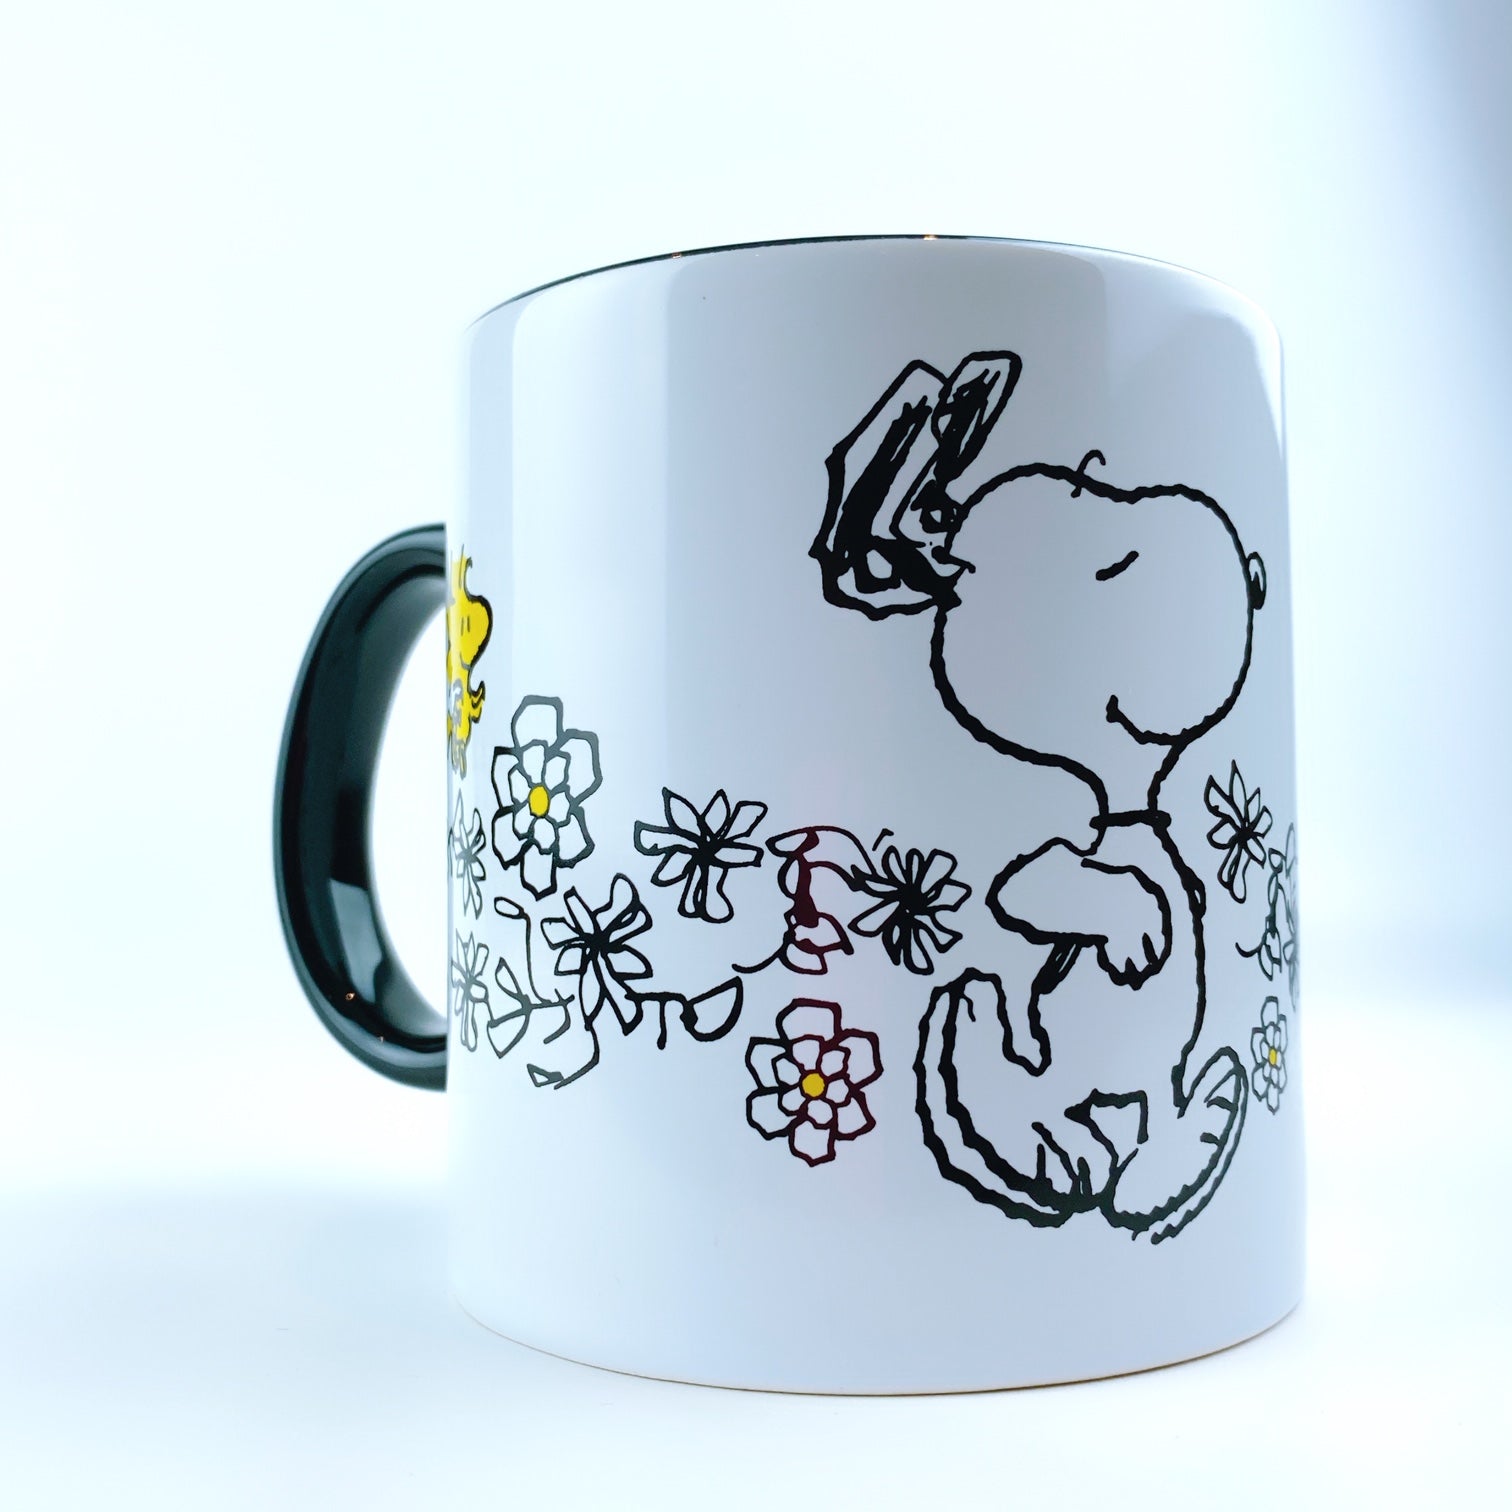 Peanuts Snoopy 12 oz. Acrylic Travel Cup - Entertainment Earth